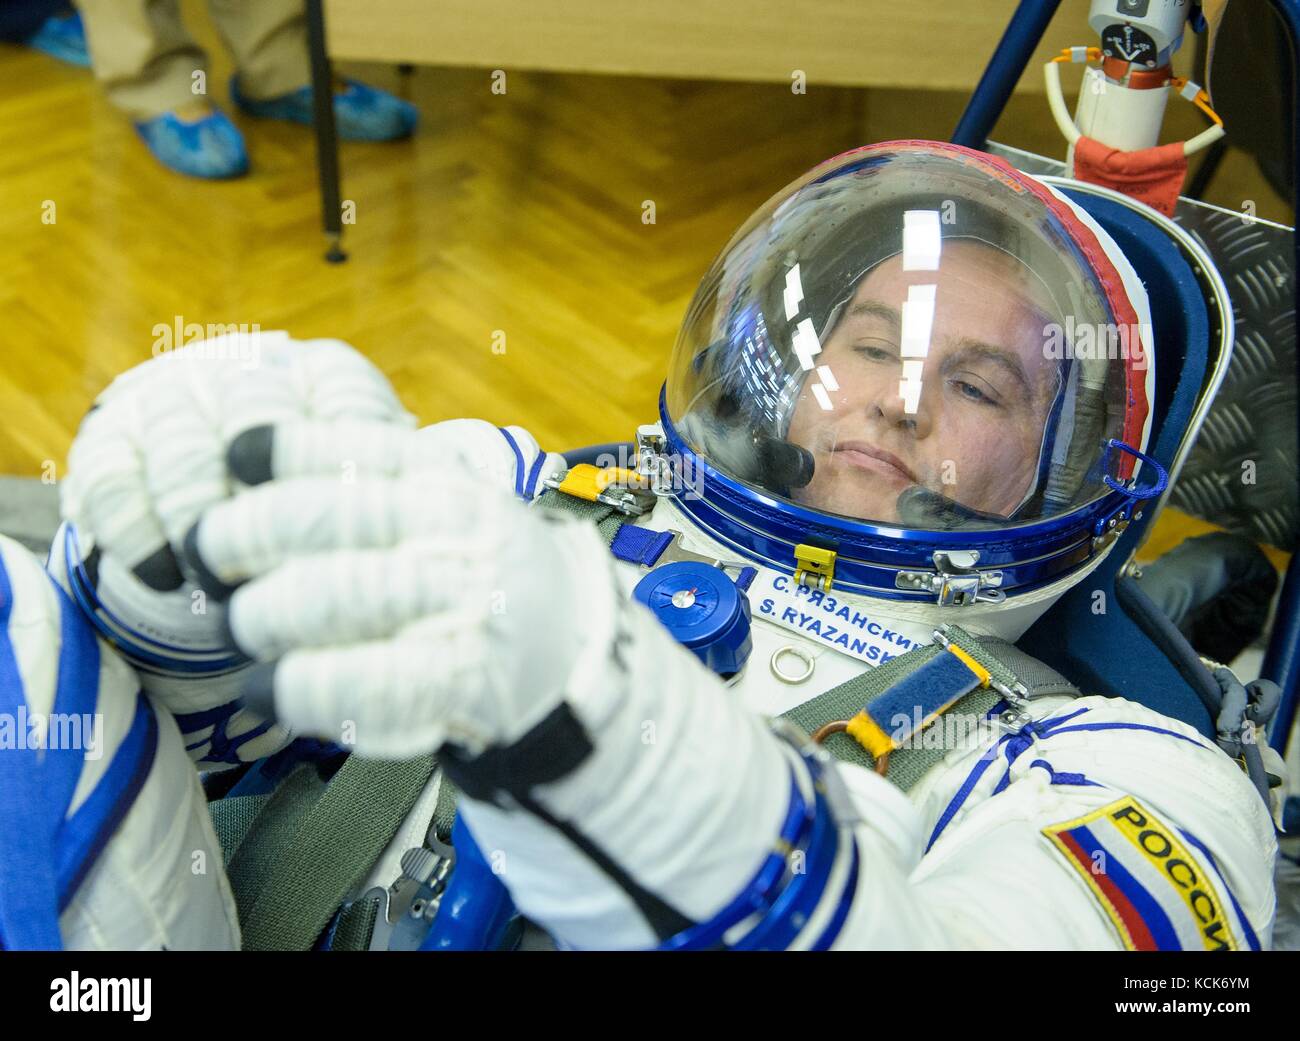 NASA International Space Station Expedition 52 prime crew member Russian cosmonaut Sergey Ryazanskiy of Roscosmos has his Sokol spacesuit pressure checked in preparation for the Soyuz MS-05 launch at the Baikonur Cosmodrome July 28, 2017 in Baikonur, Kazakhstan.  (photo by Andrey Shelepin  via Planetpix) Stock Photo